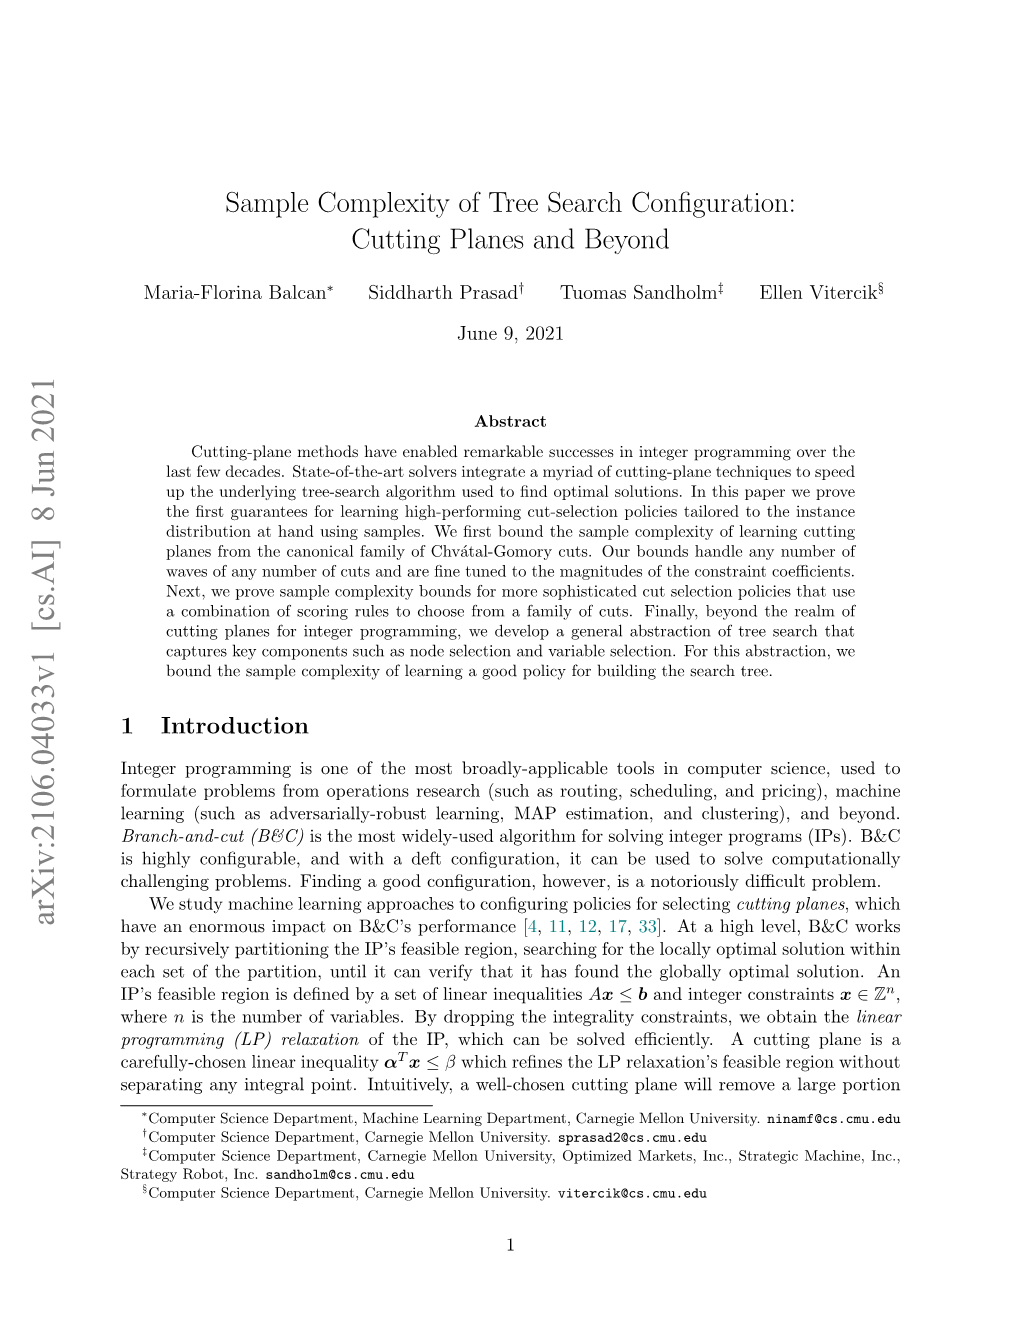 Sample Complexity of Tree Search Configuration: Cutting Planes And